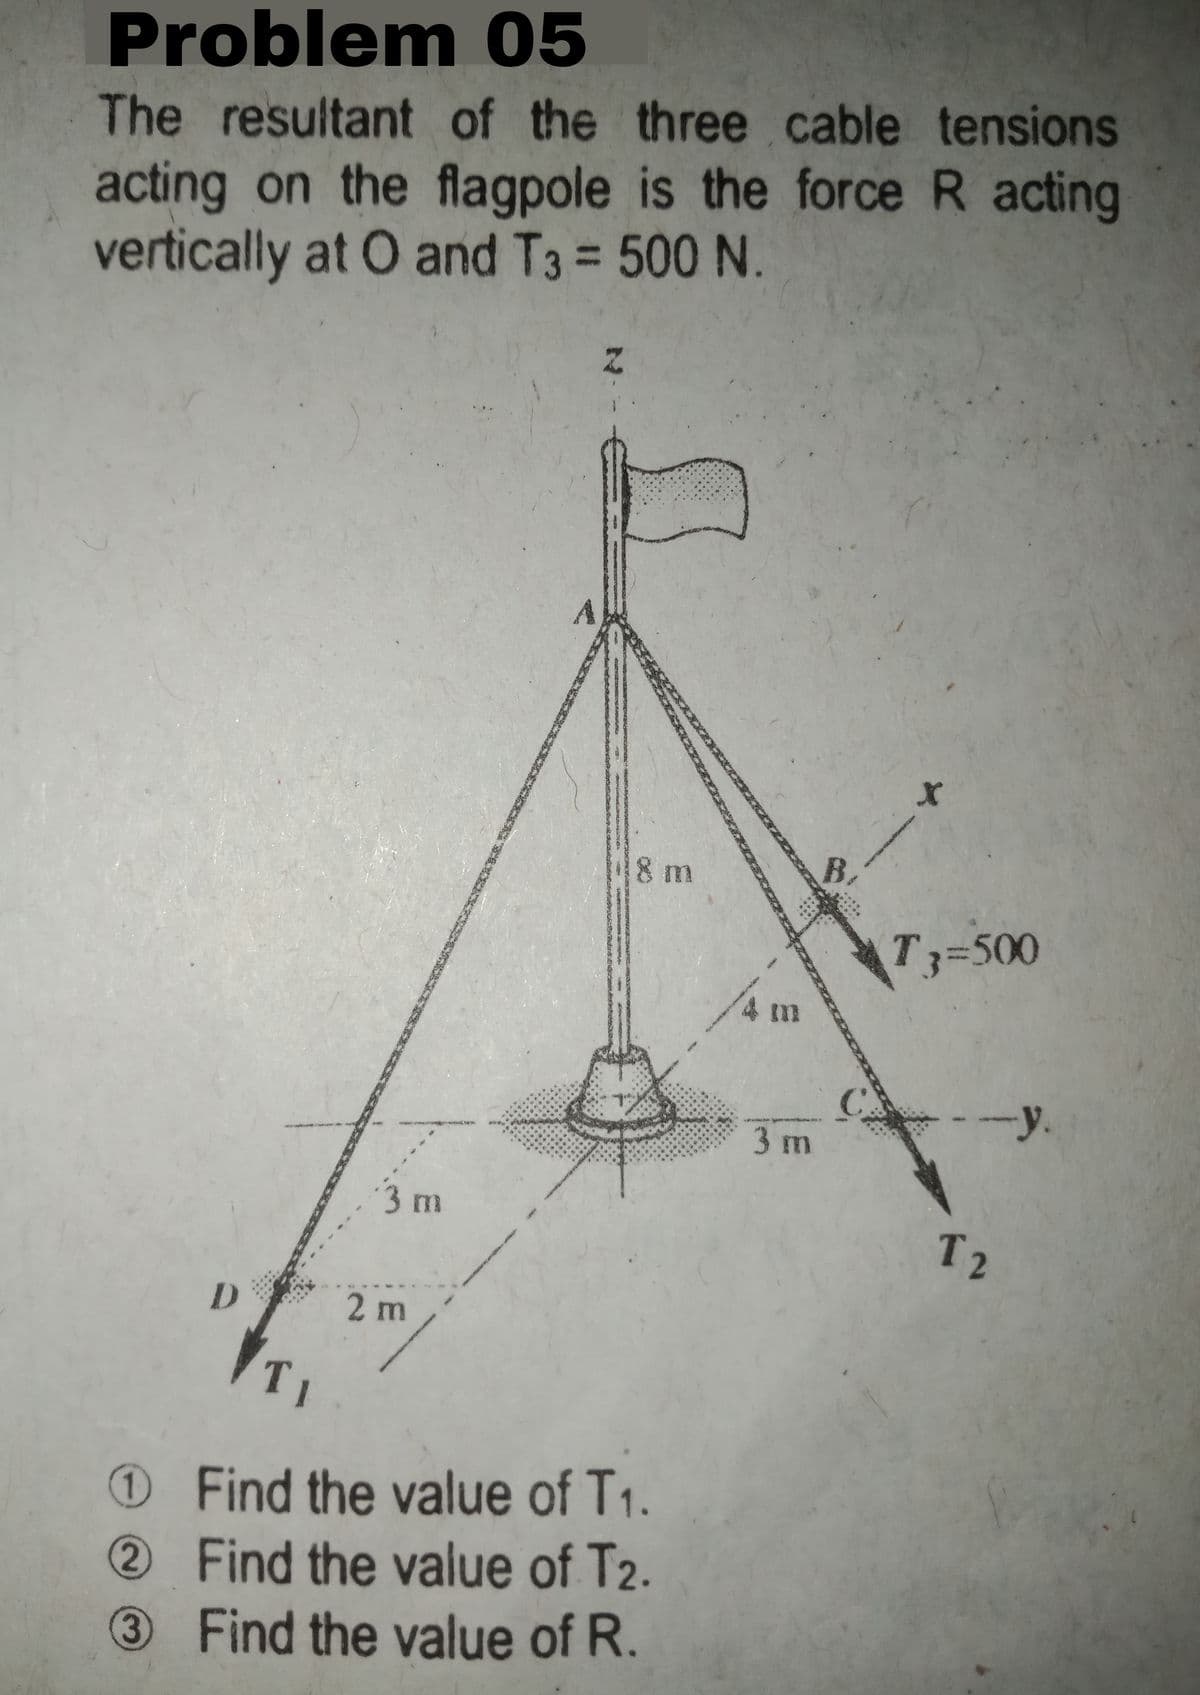 Problem 05
The resultant of the three cable tensions
acting on the flagpole is the force R acting
vertically at O and T3 = 500 N.
%3D
8 m
B.
T3=500
C.
-y.
3 m
3 m
T2
D
2 m
T1
Find the value of T1.
2 Find the value of T2.
3 Find the value of R.
